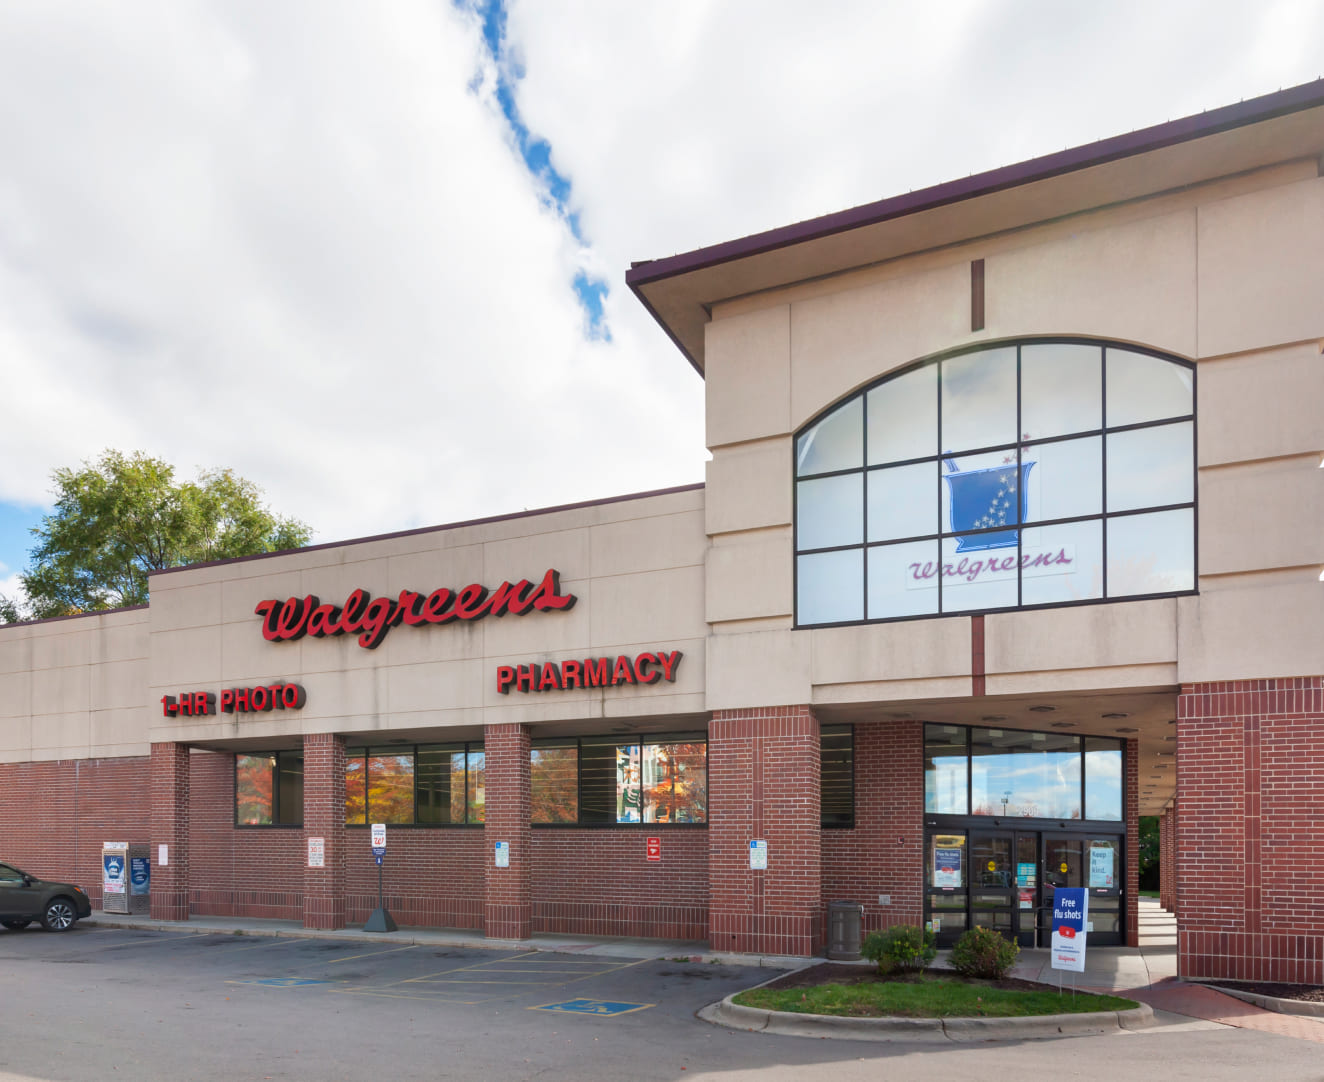 The entrance to the Walgreens at 2909 East Washington Avenue in Madison, WI.